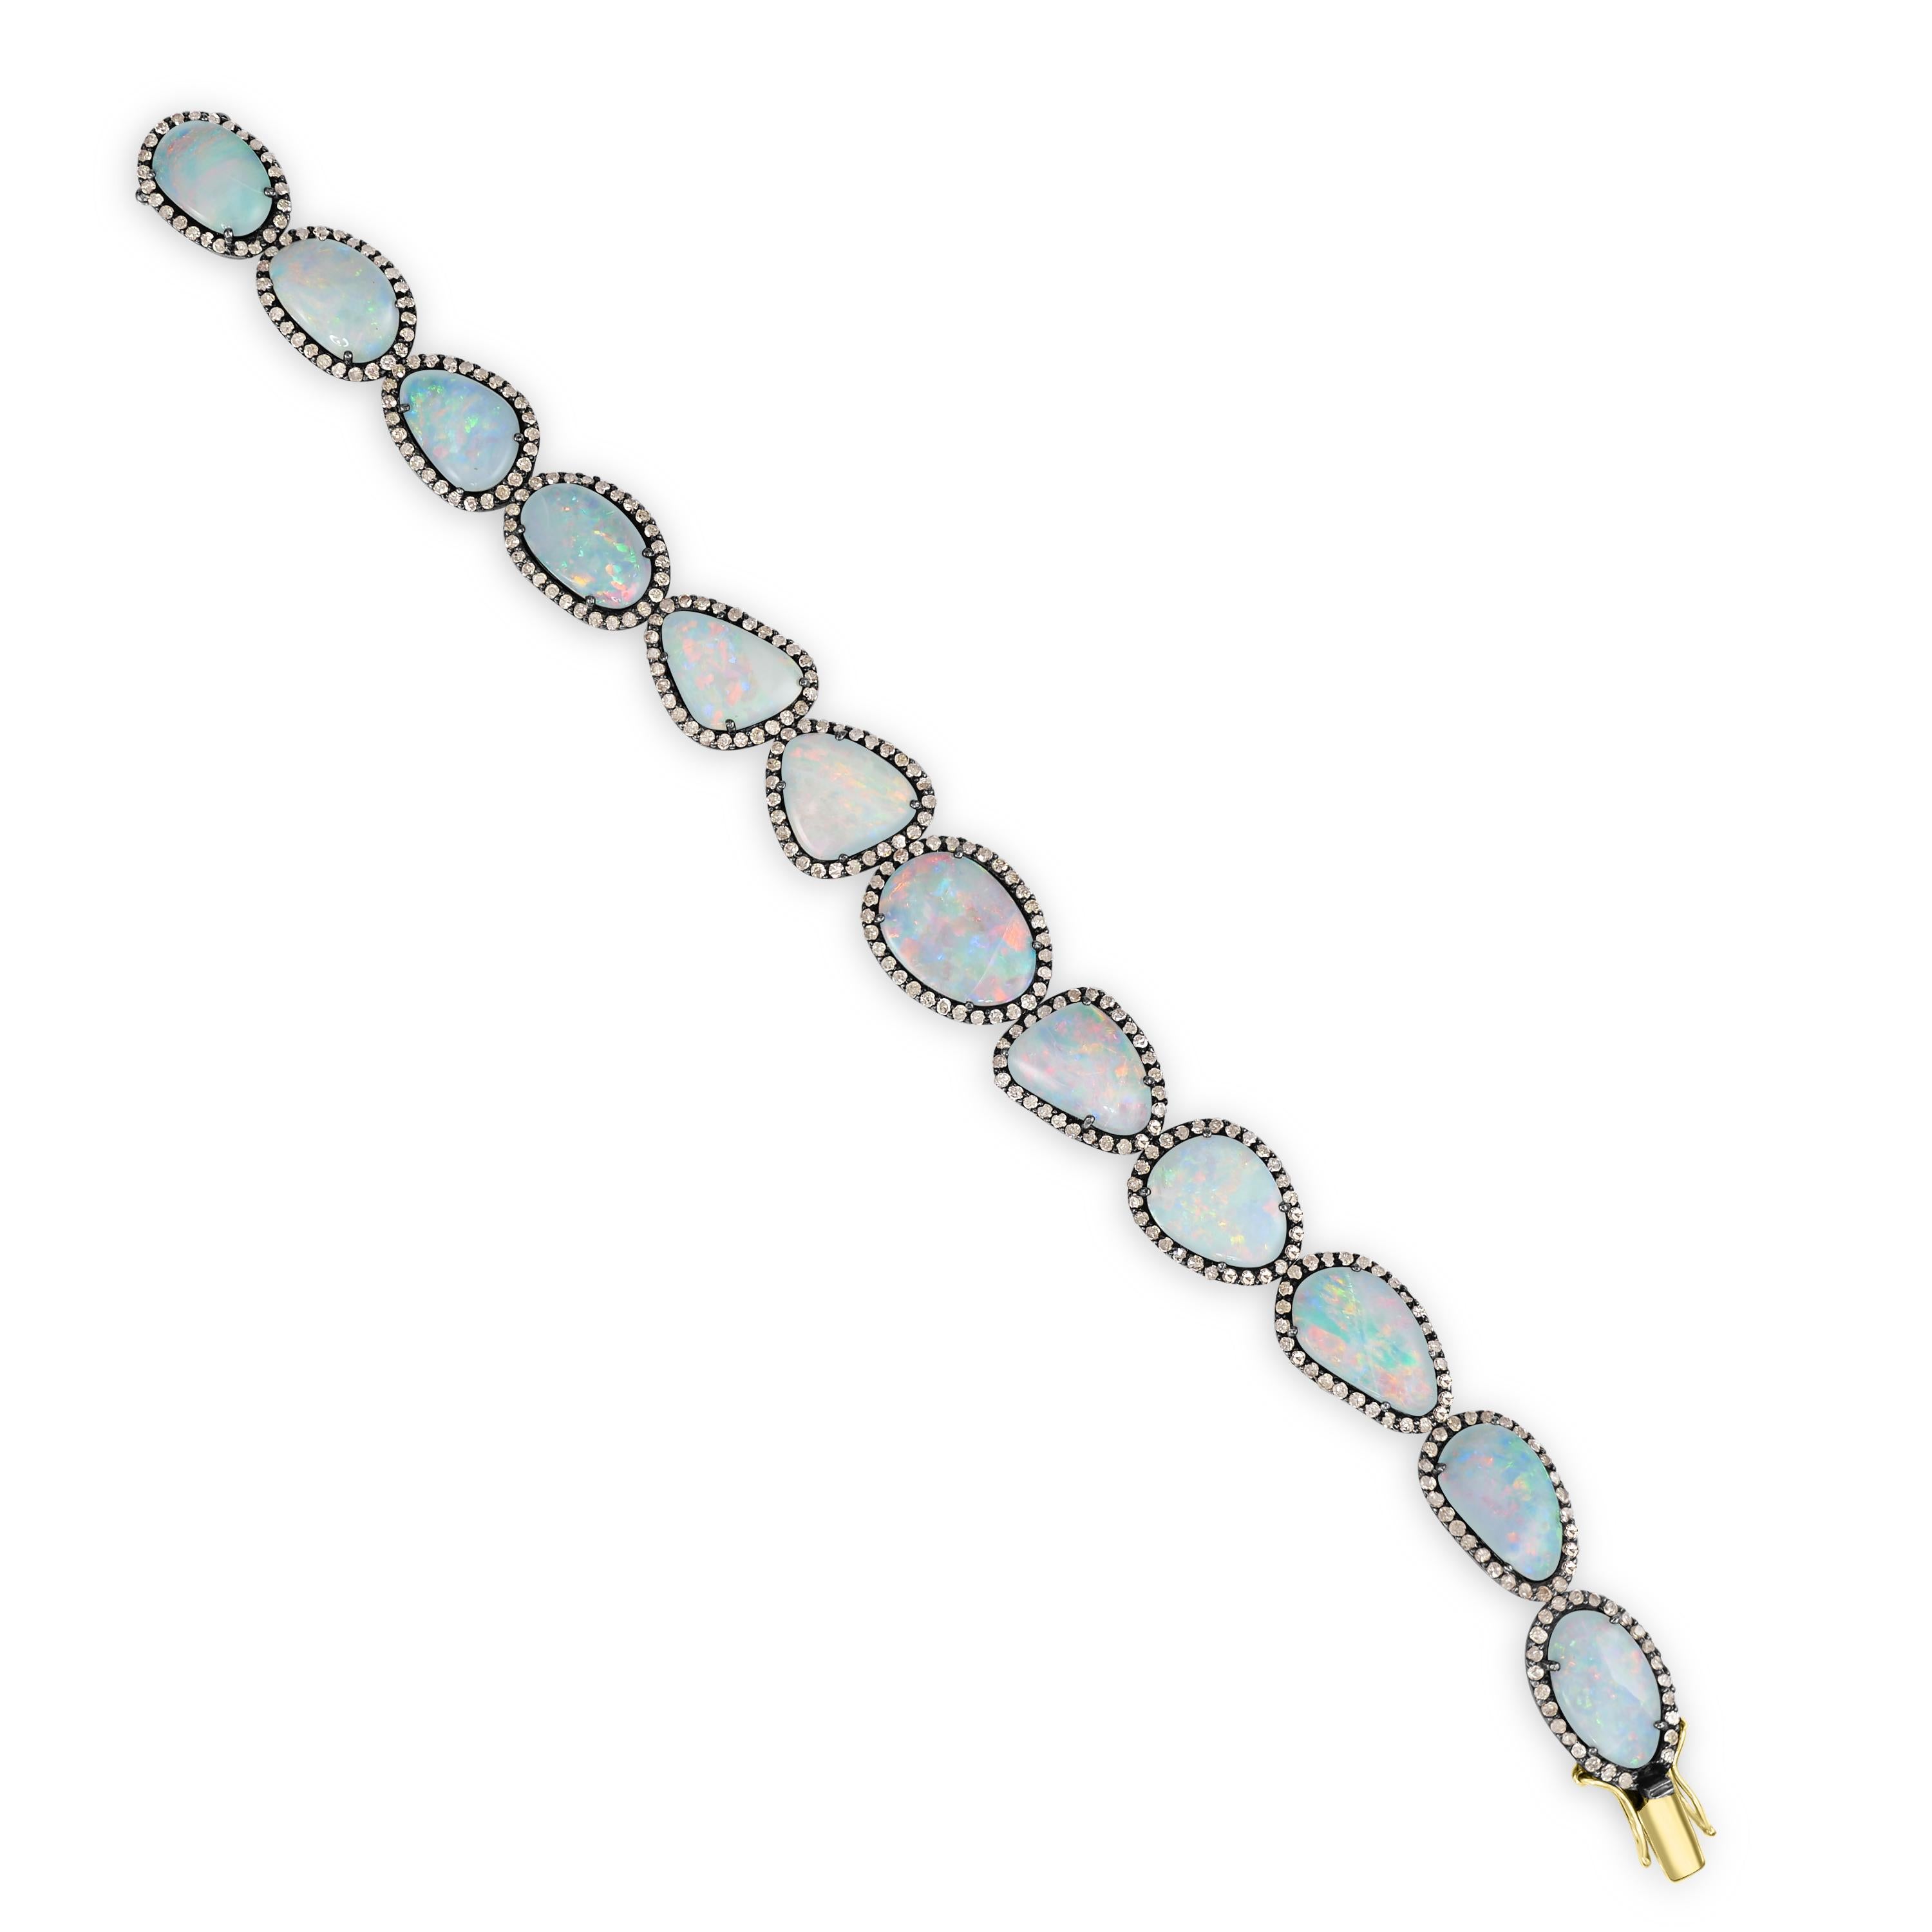 Indulge in the enchanting allure of our Victorian Doublet Blue Opal and Diamond Link Bracelet, a masterpiece of sophistication and elegance.

This exquisite bracelet showcases a stunning array of multiple oval Doublet Blue Opal stones, each encased